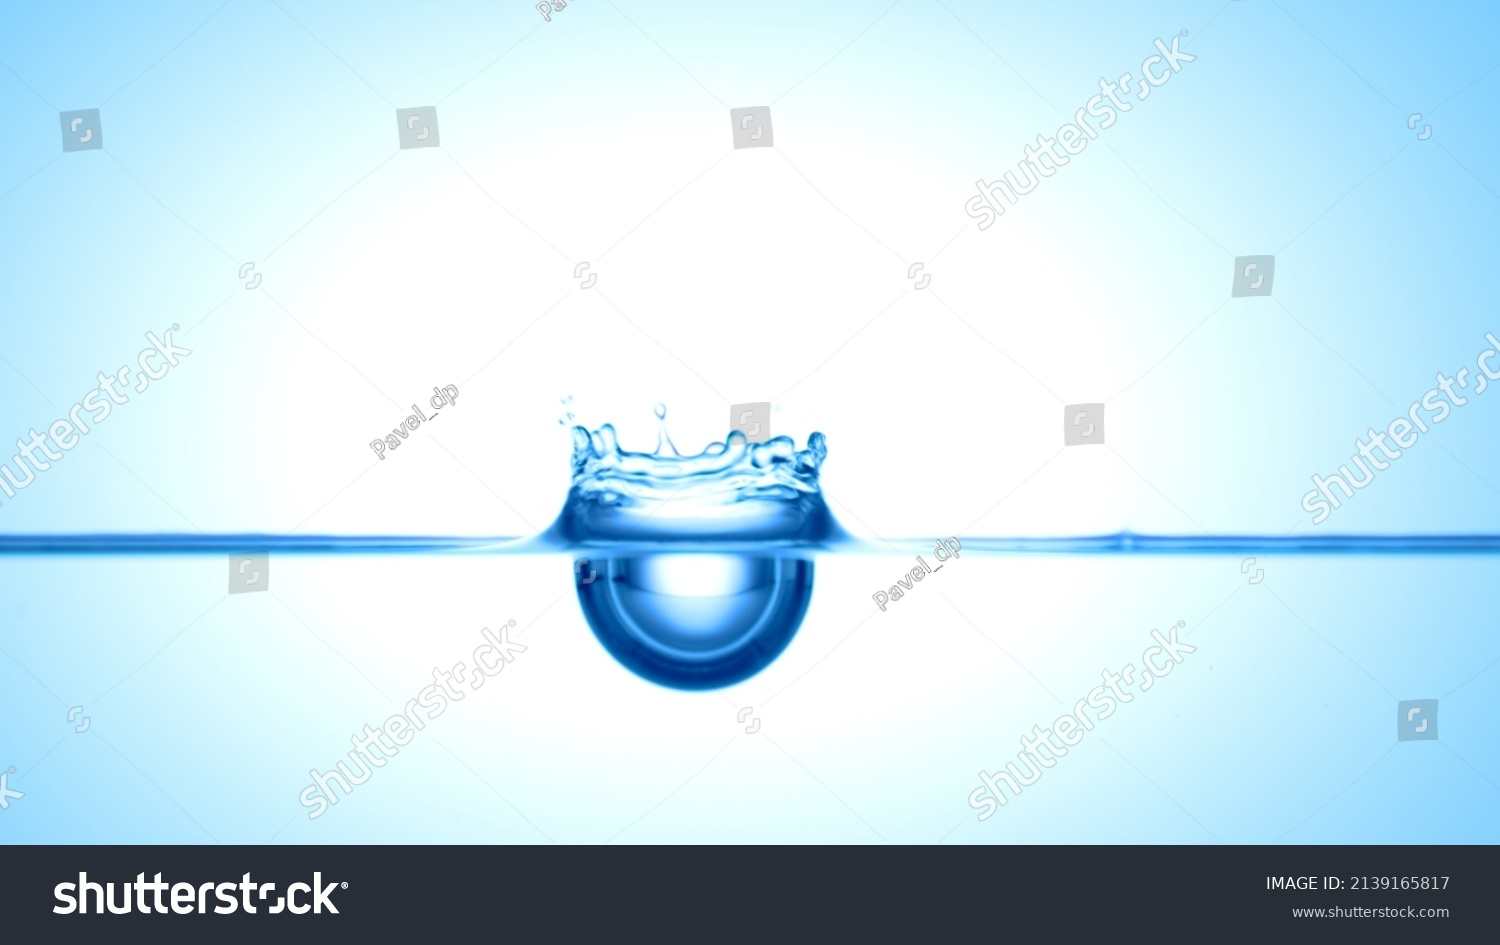 Blue drop falls down on blue transparent liquid creating a crown on it's surface | Abstract skin moisturizing cosmetics mixing concept #2139165817